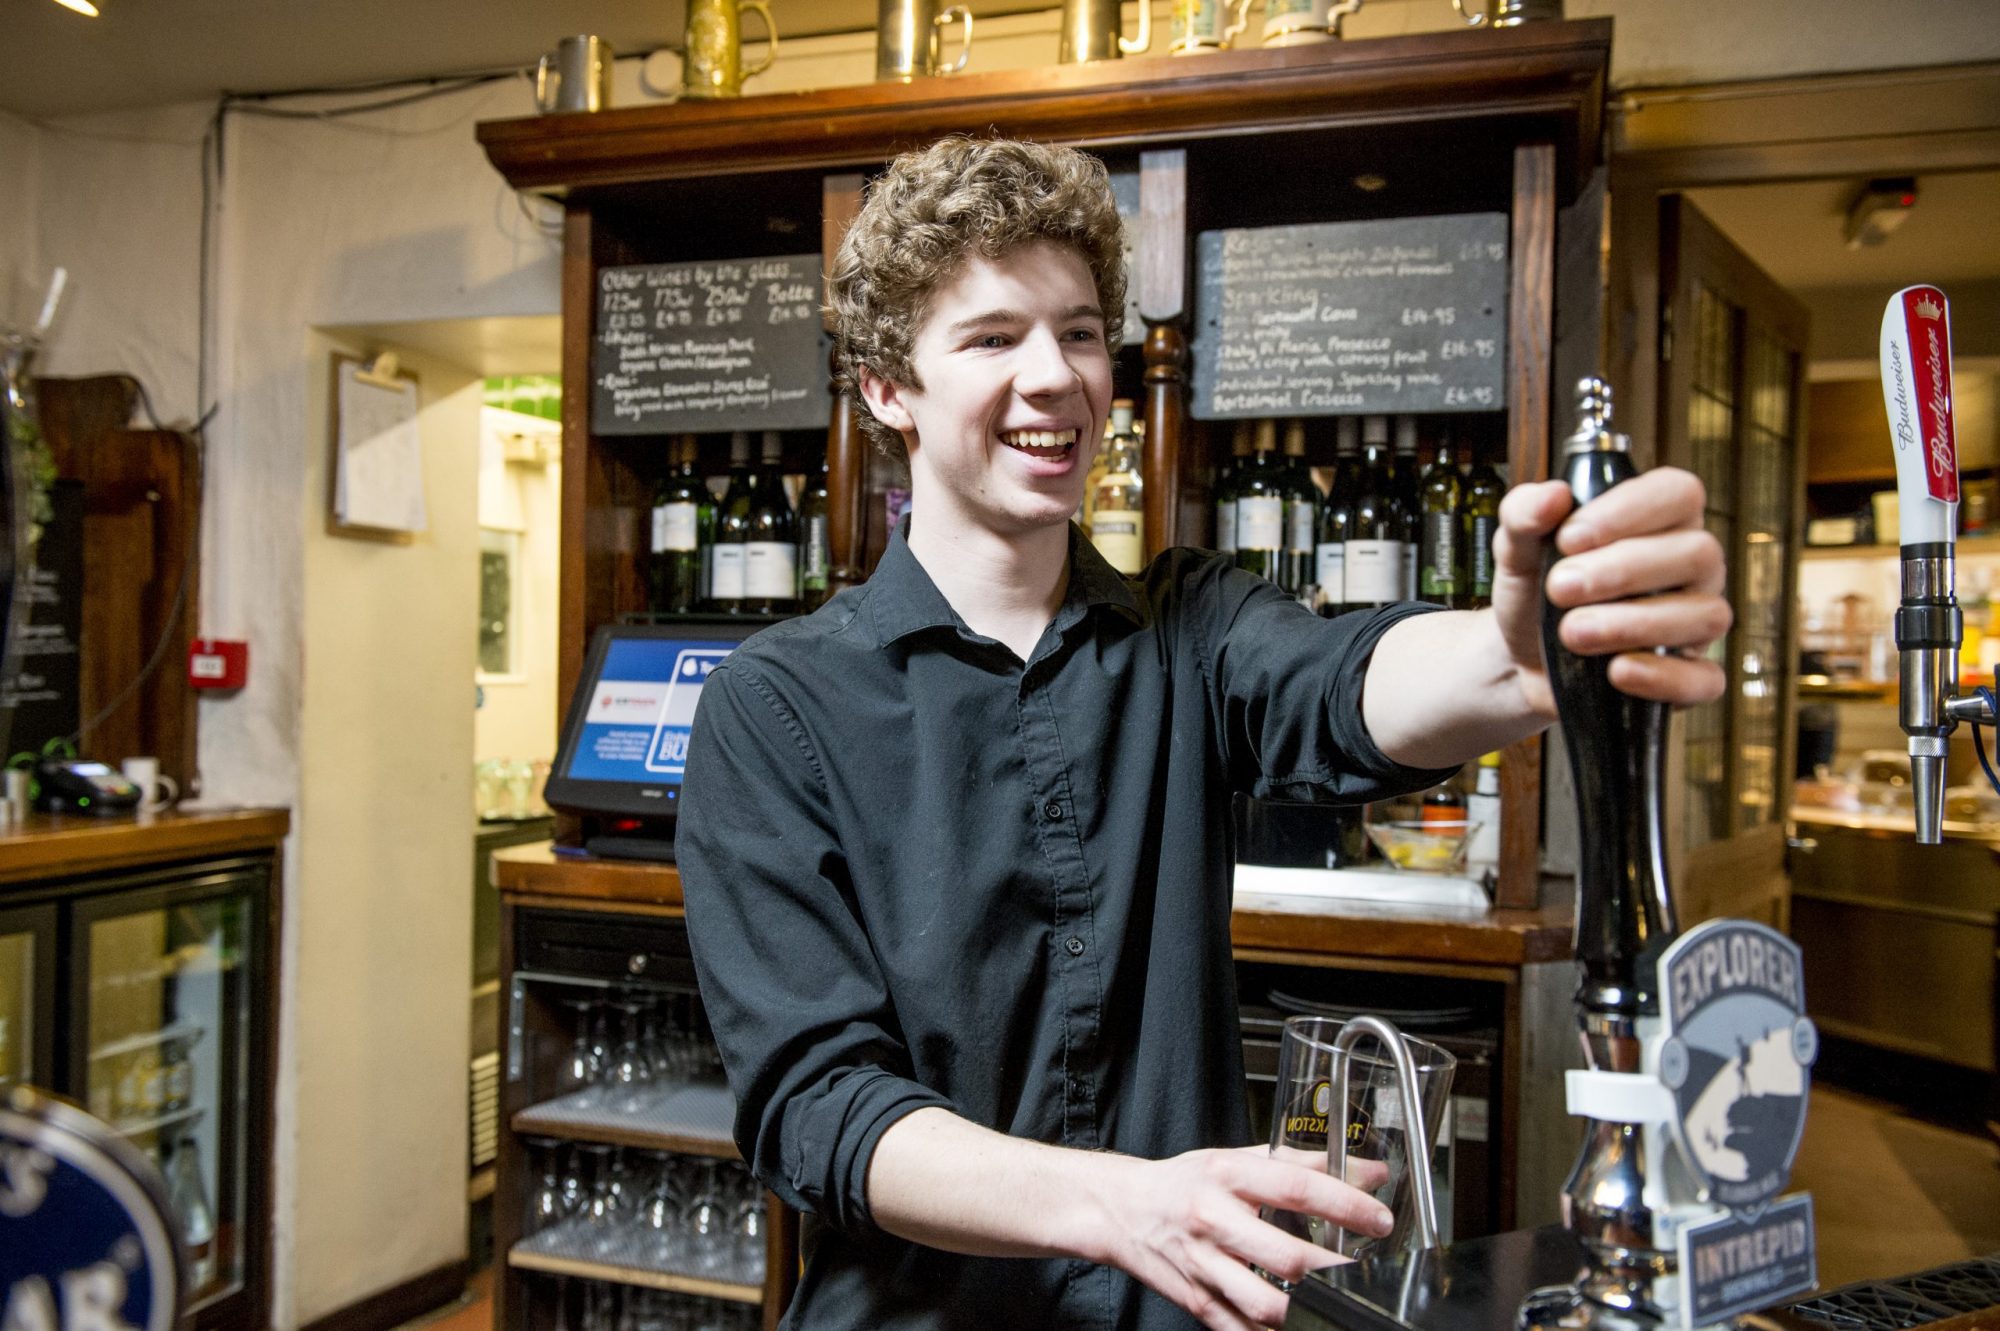 New £3.62 million support programme to help communities take control of their local pub